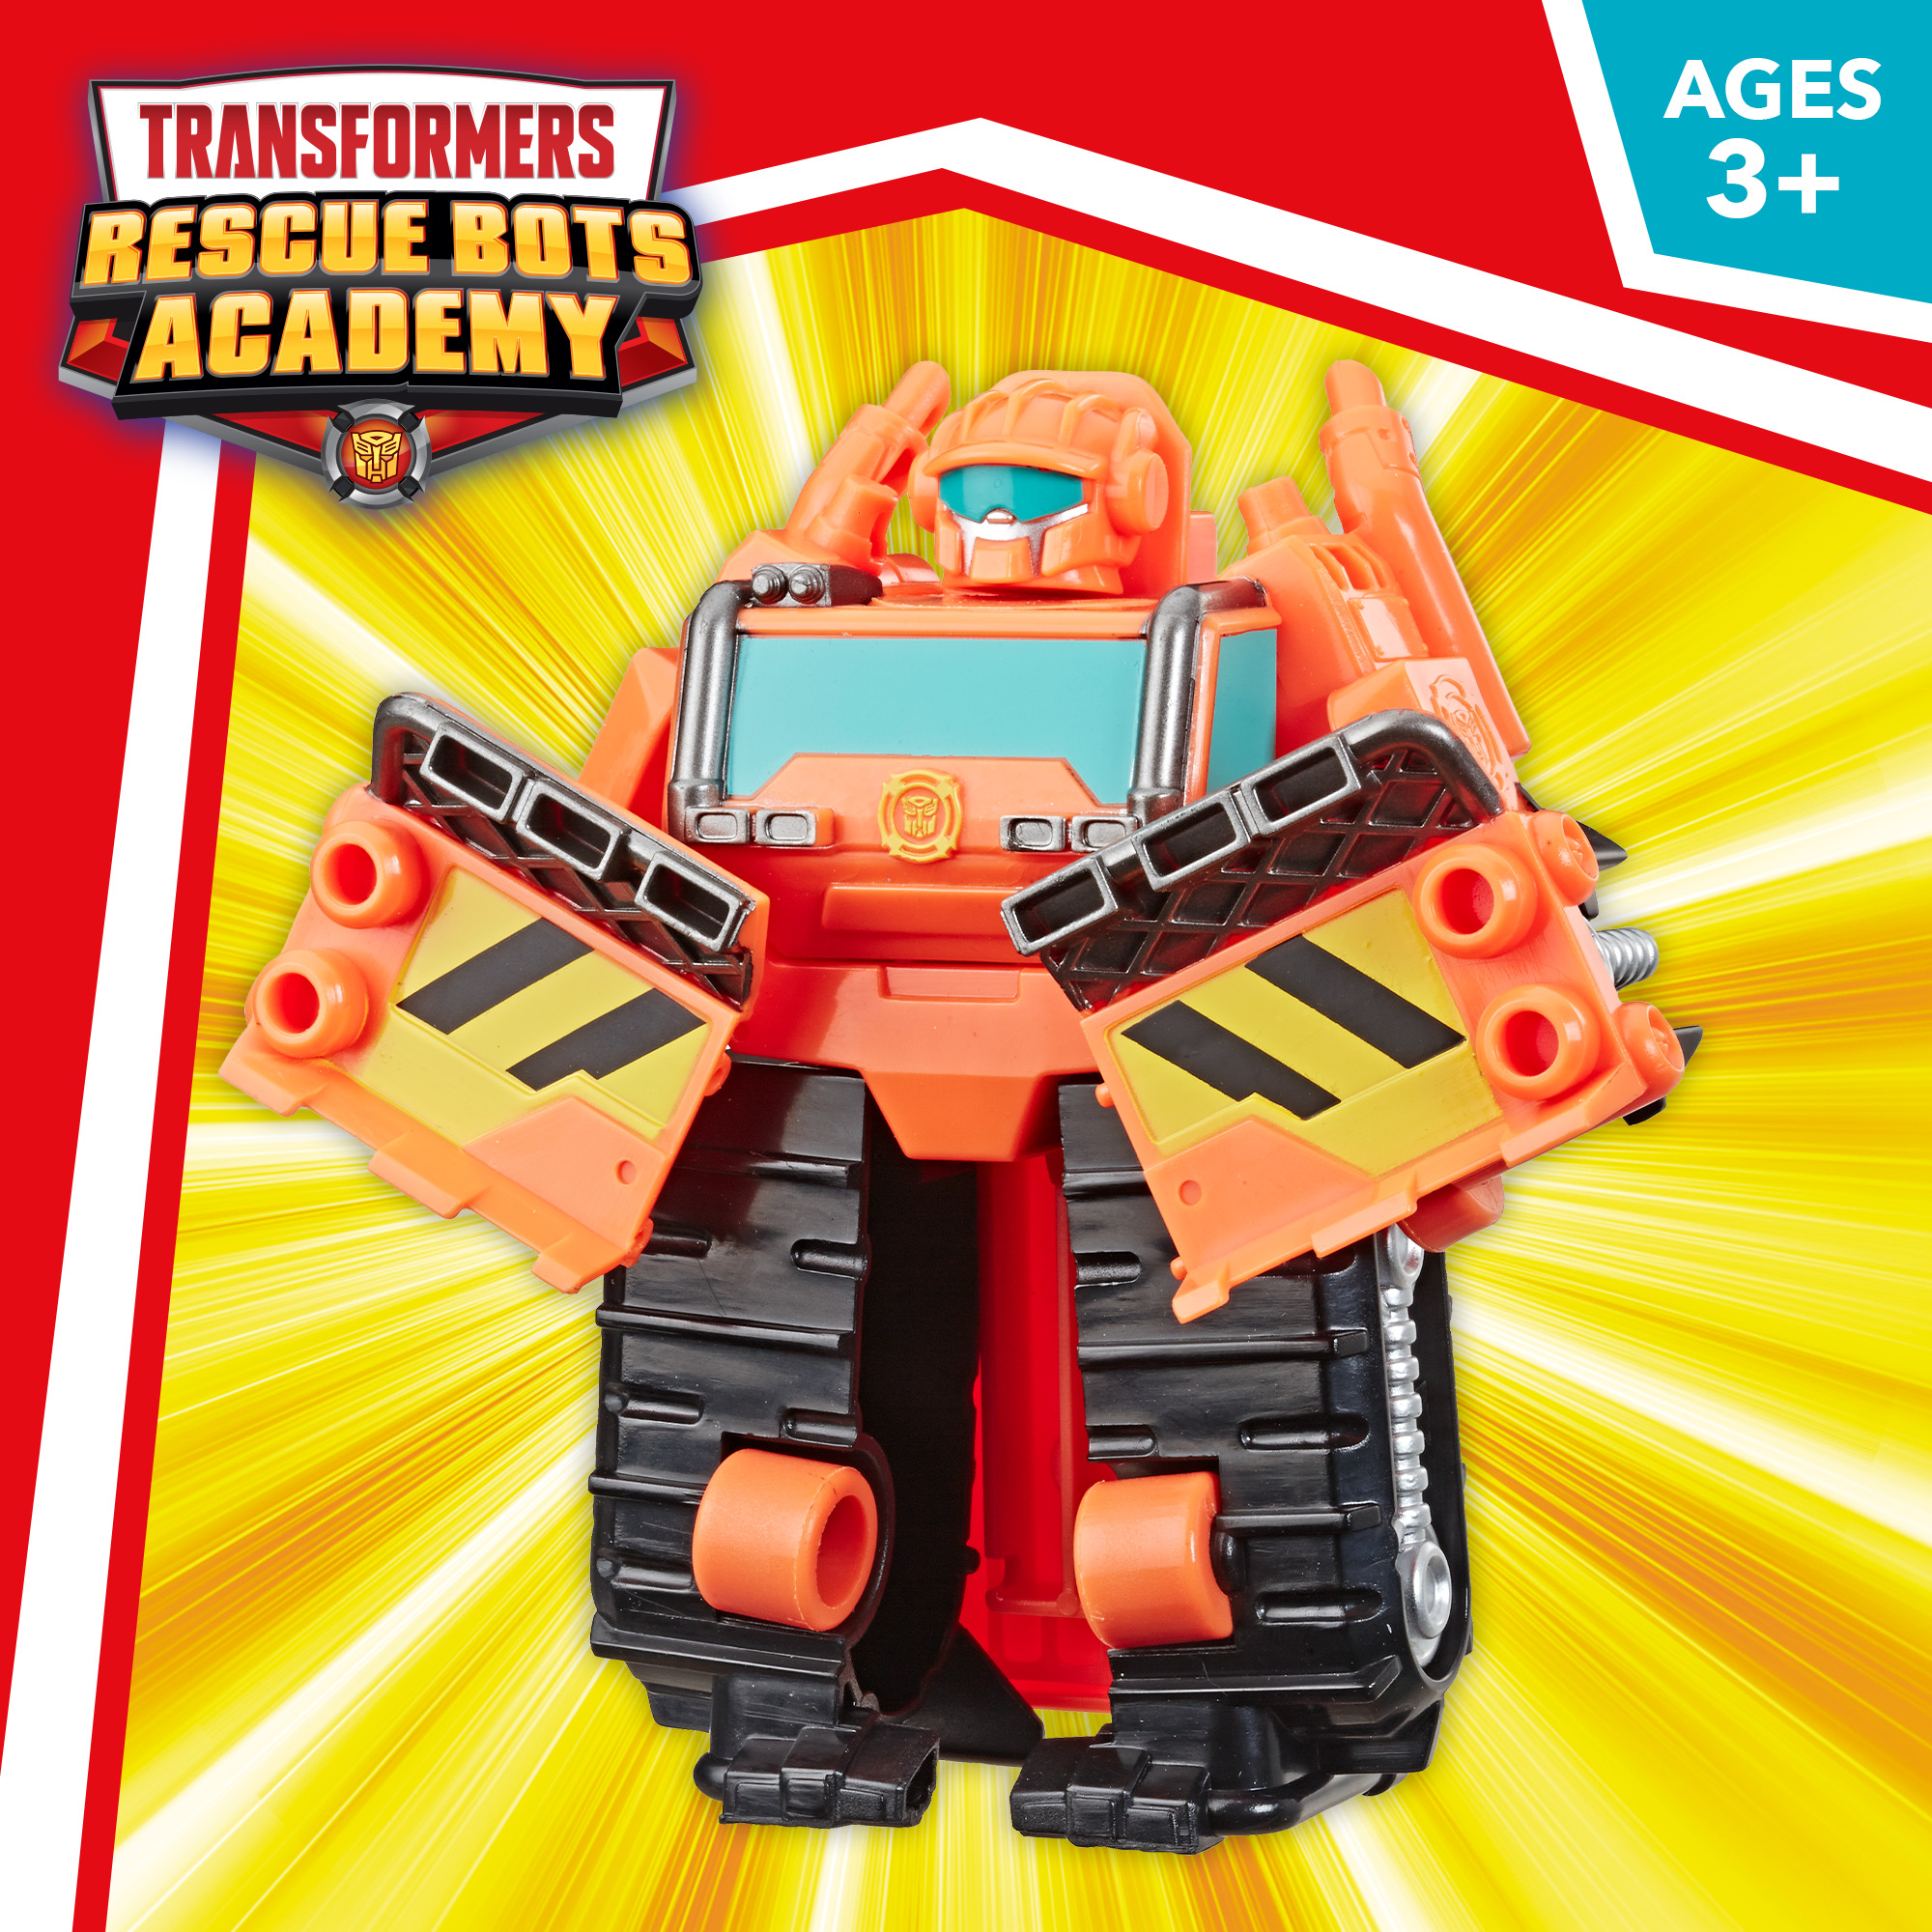 Playskool Transformers Rescue Bots Academy Wedge the Construction-Bot Action Figure - image 5 of 8